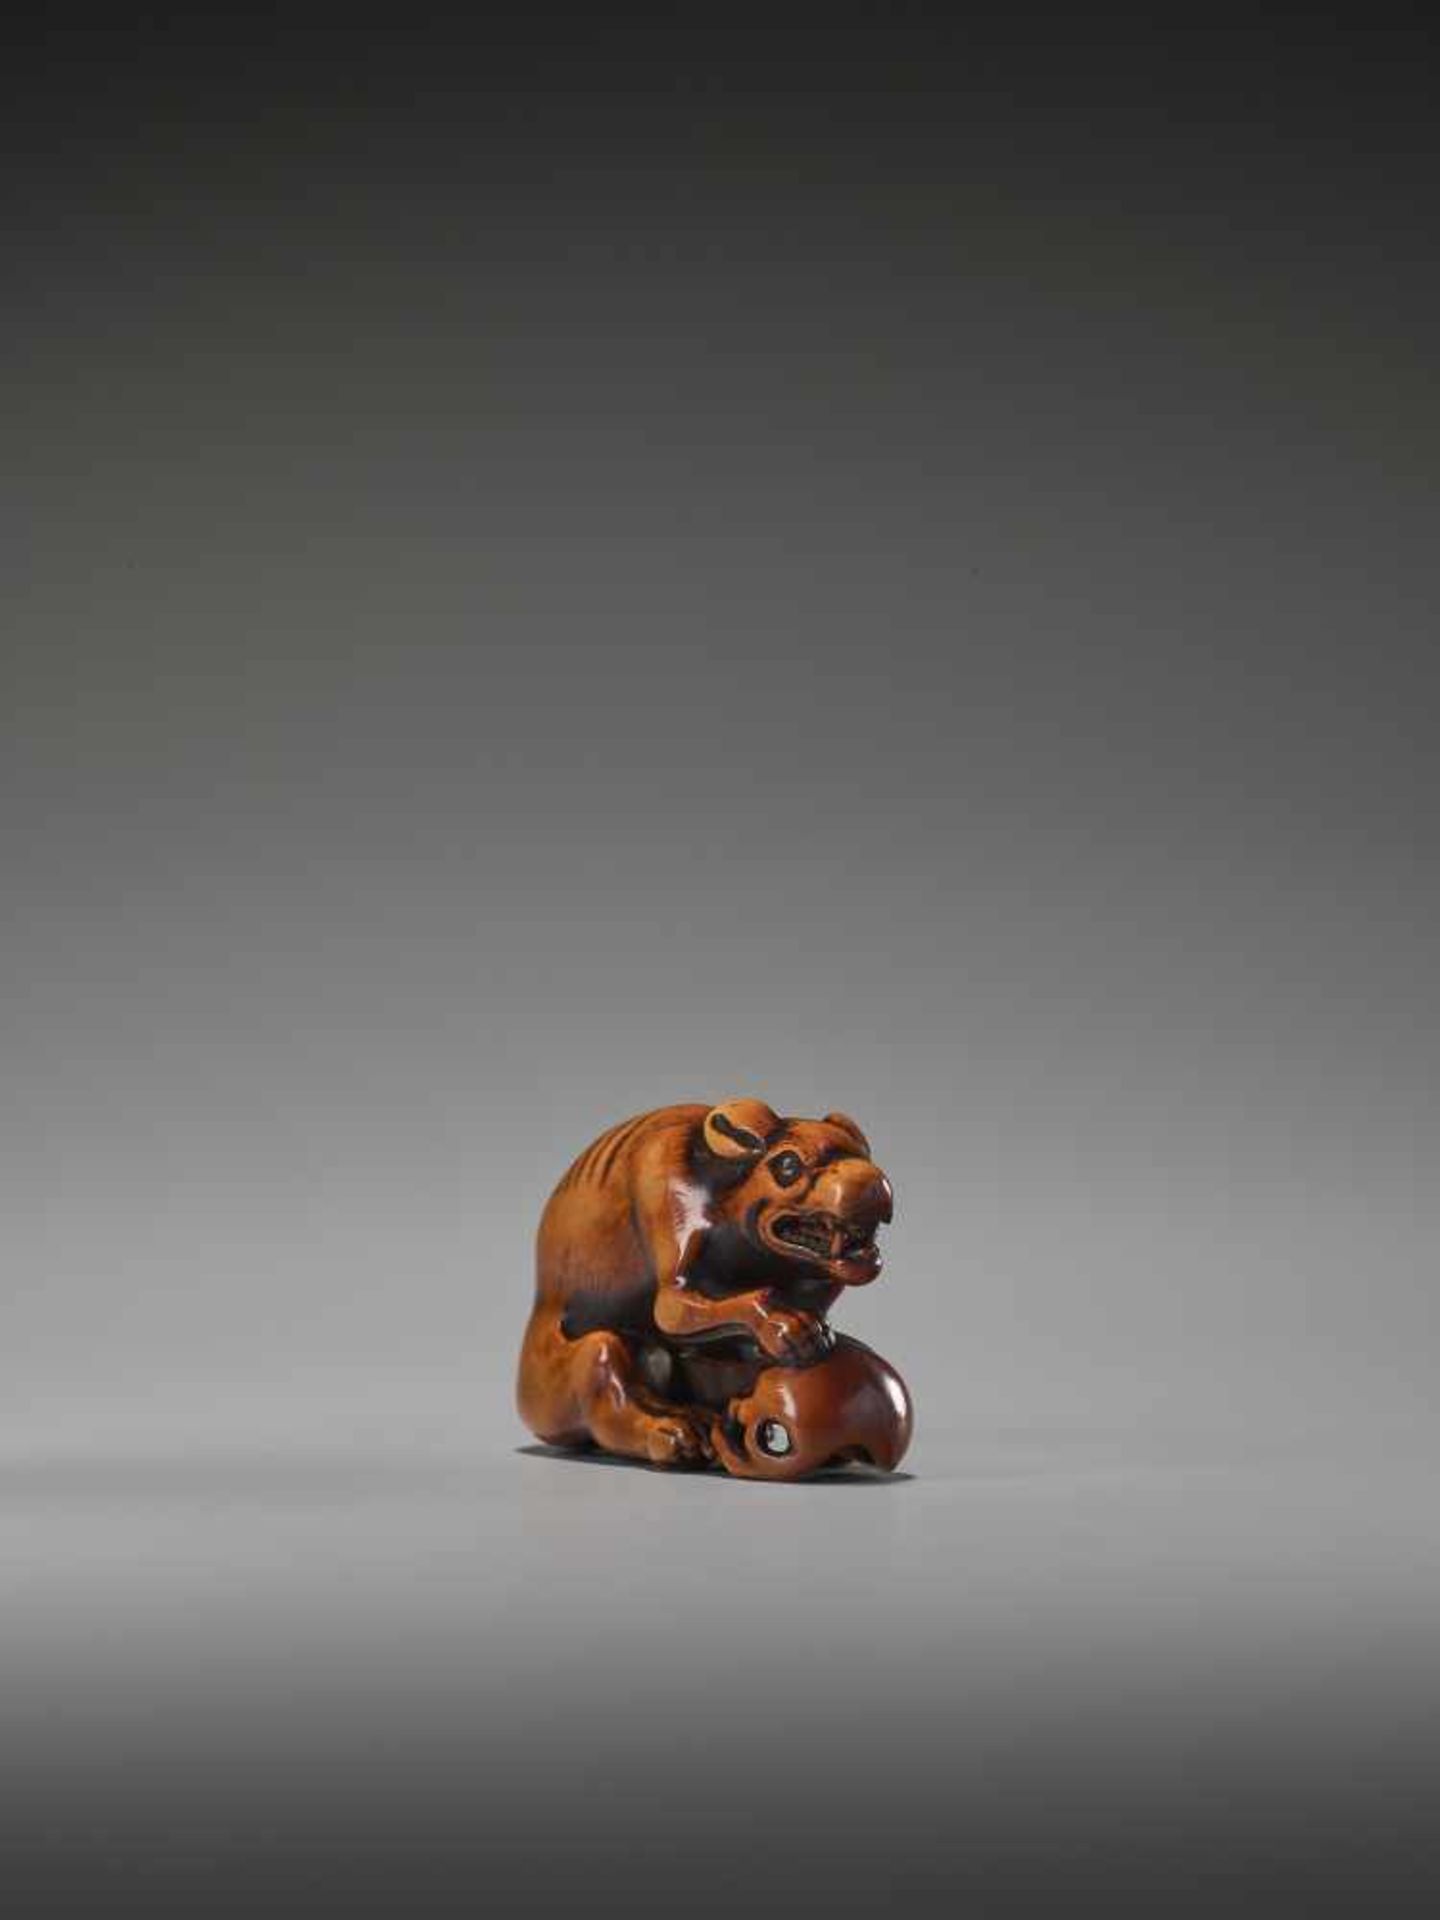 A POWERFUL WOOD NETSUKE OF A WOLF WITH A SKULL UnsignedJapan, 18th century, Edo period (1615-1868) - Image 4 of 9